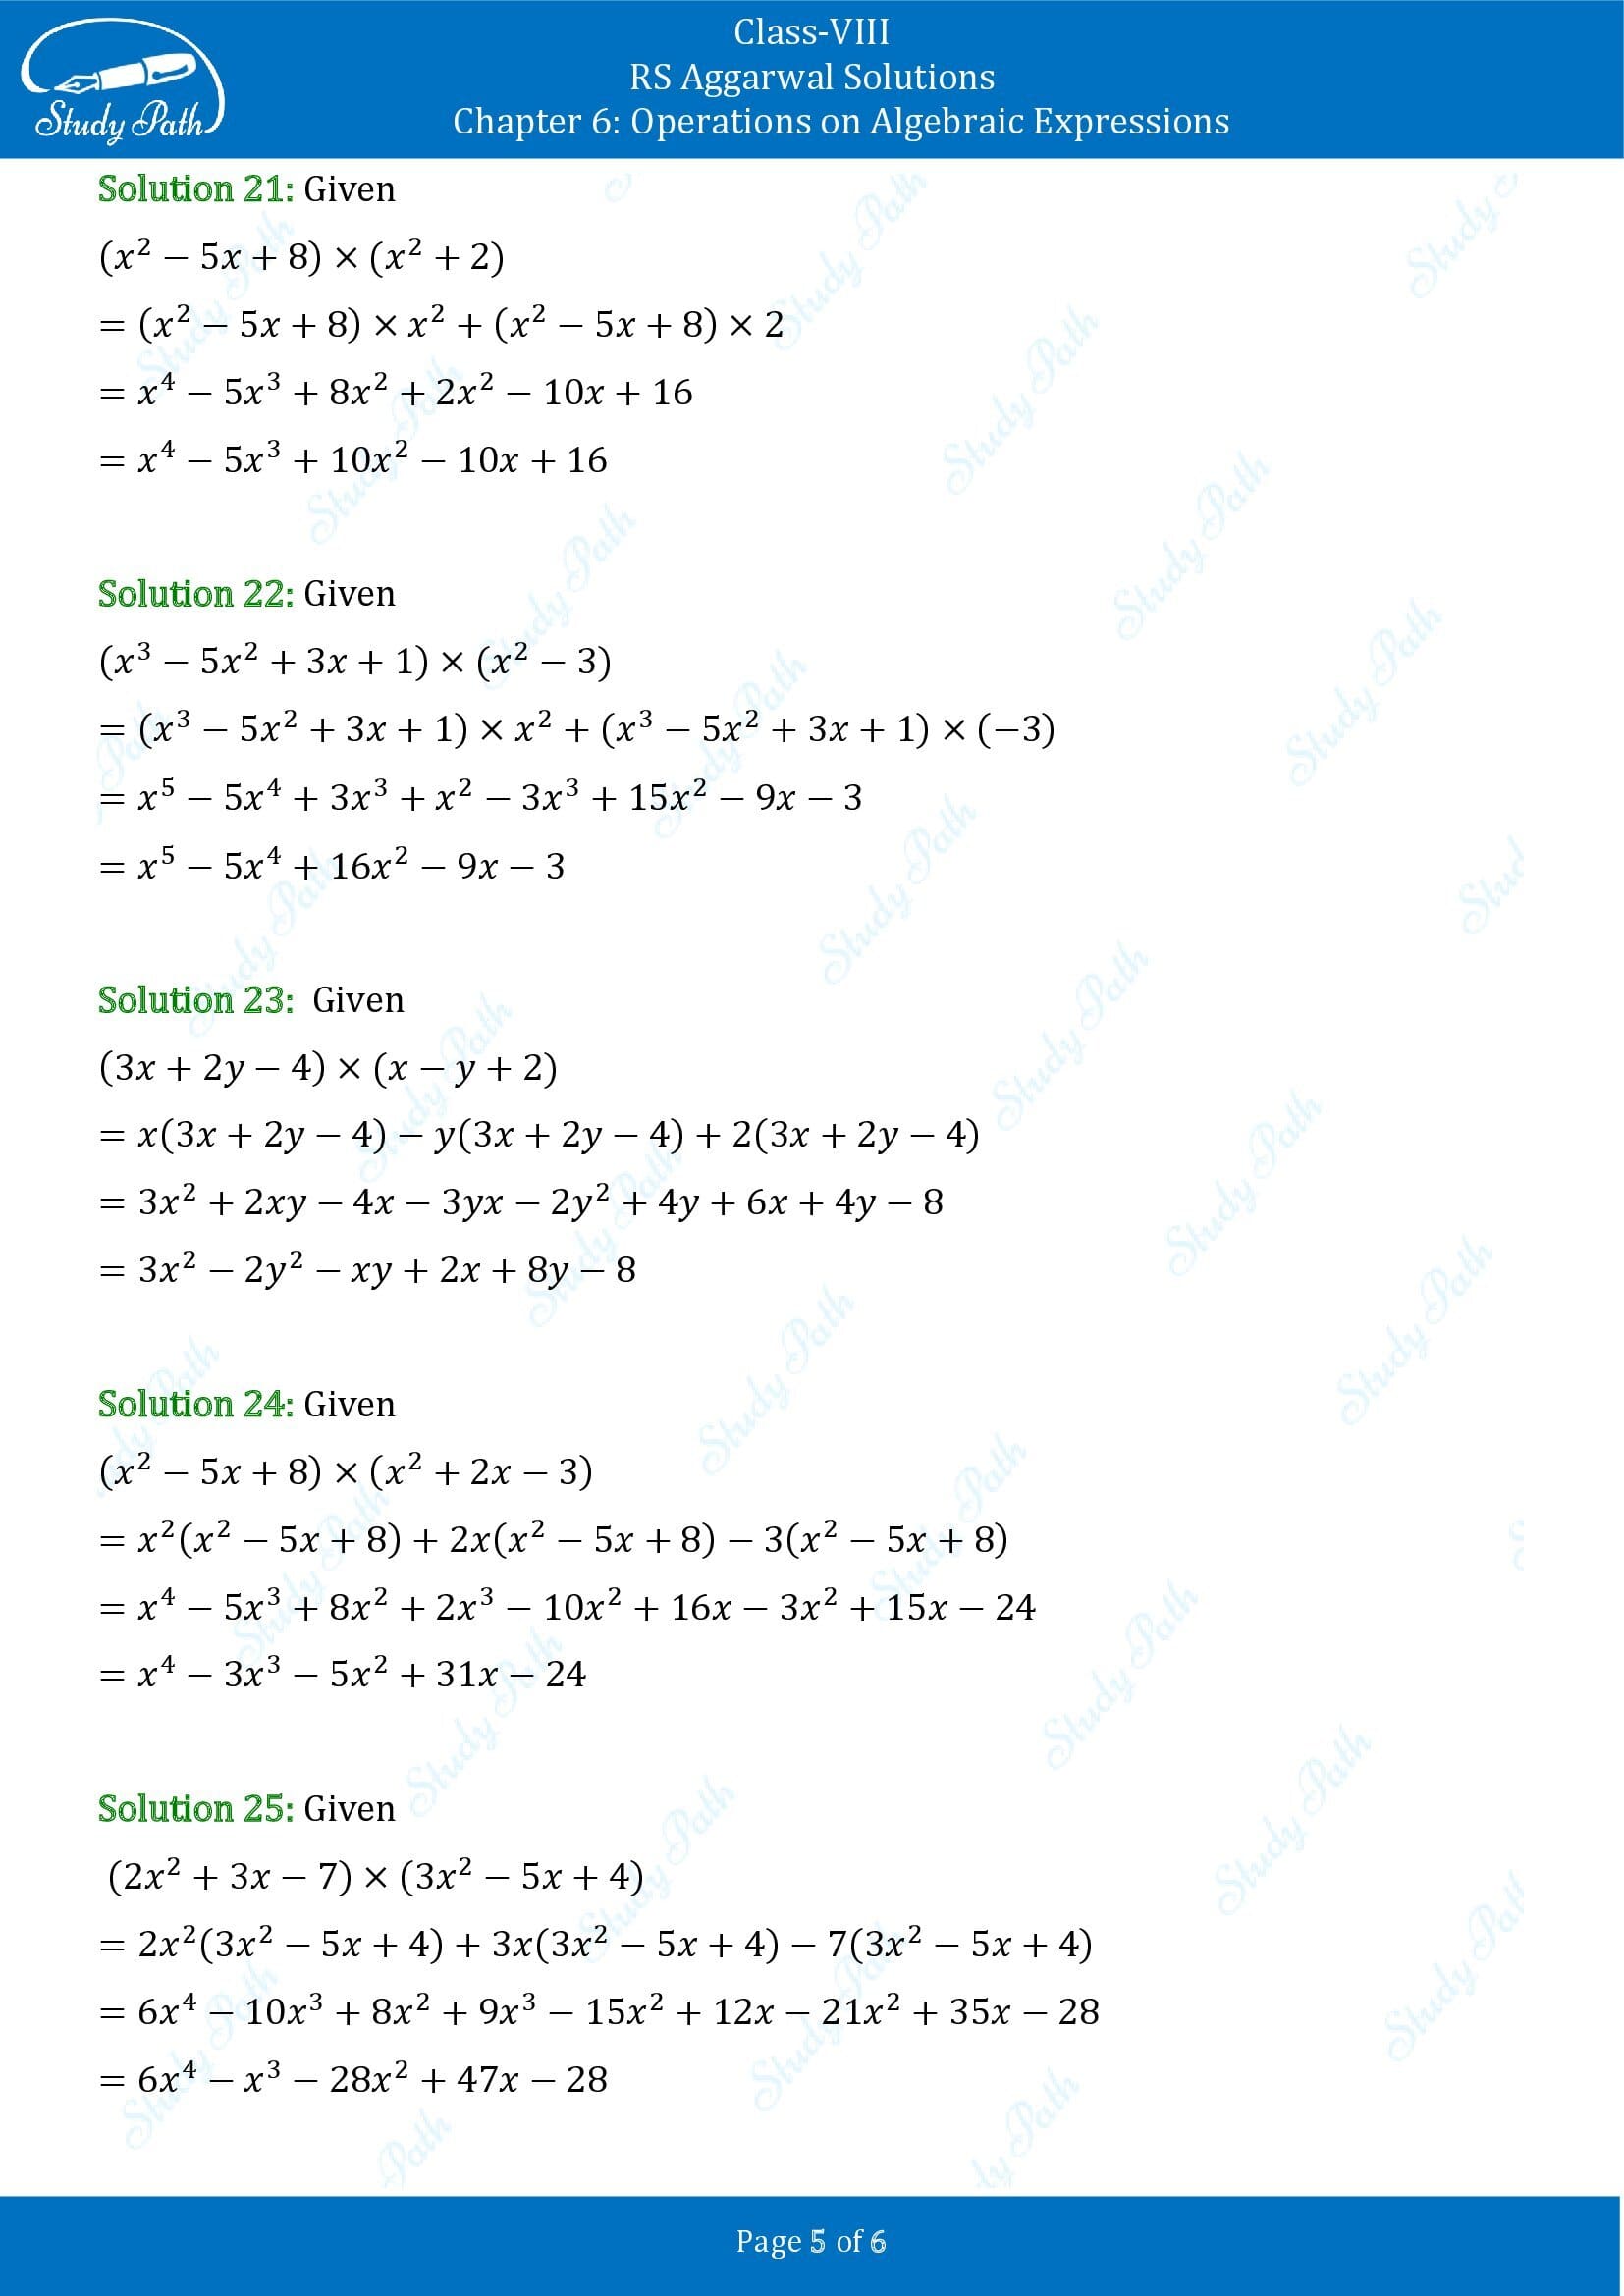 RS Aggarwal Solutions Class 8 Chapter 6 Operations on Algebraic Expressions Exercise 6B 00005